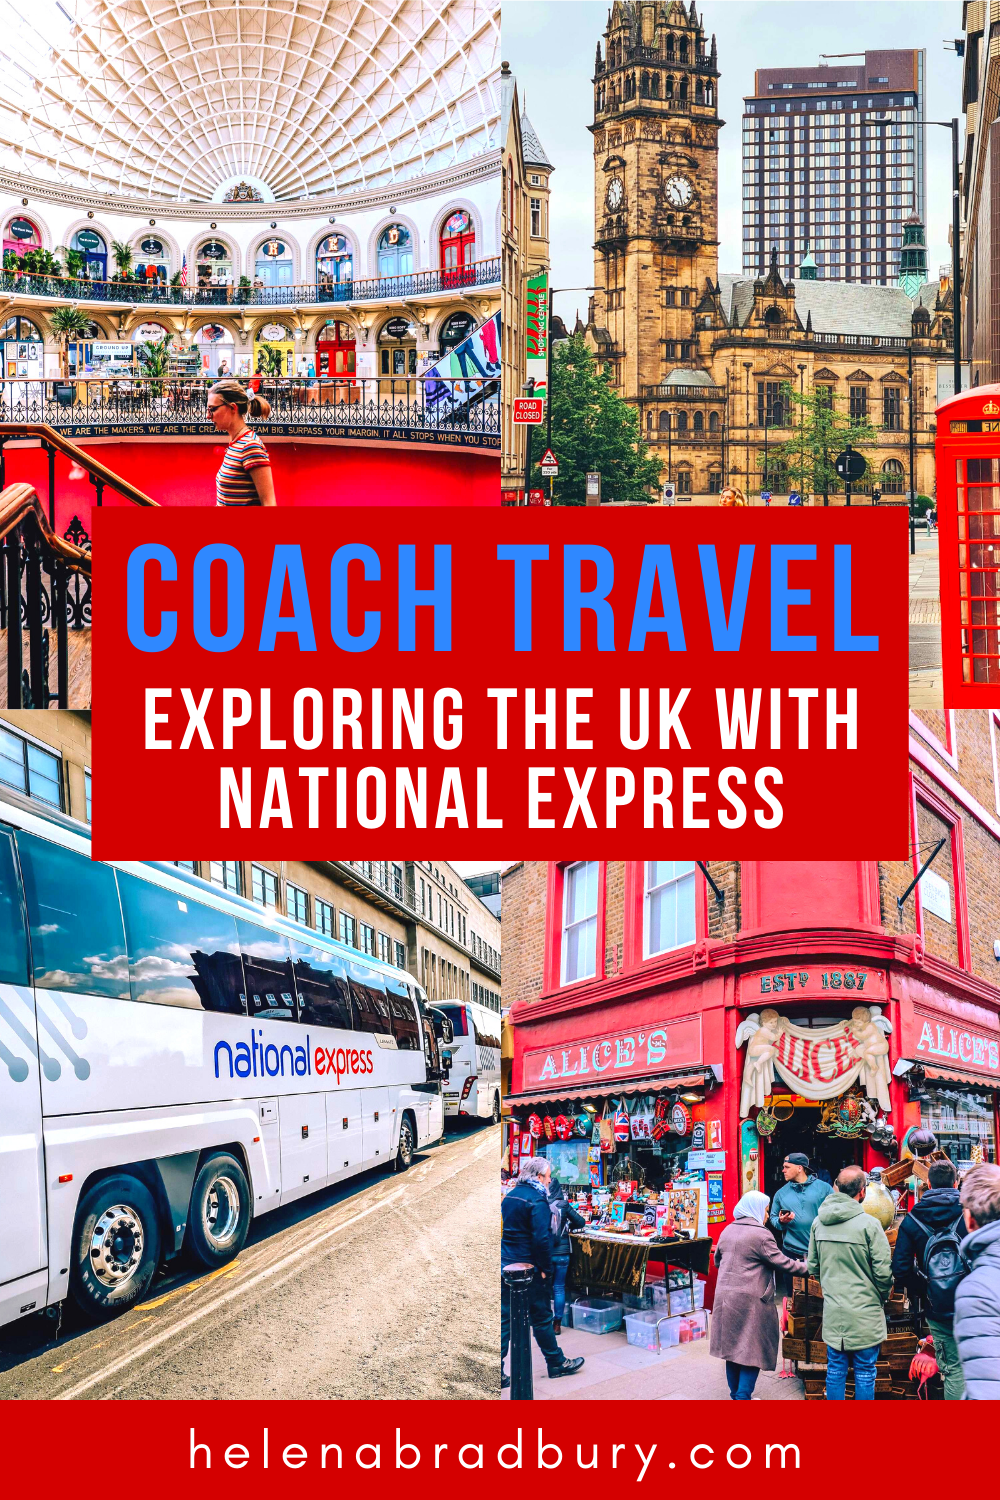 Here are a few ideas for coach trips from Nottingham with National Express  | national express coach travel | coach travel buses | coach travel tips | travel uk on a budget | budget travel uk | national express coach buses | travel on a budget | day…